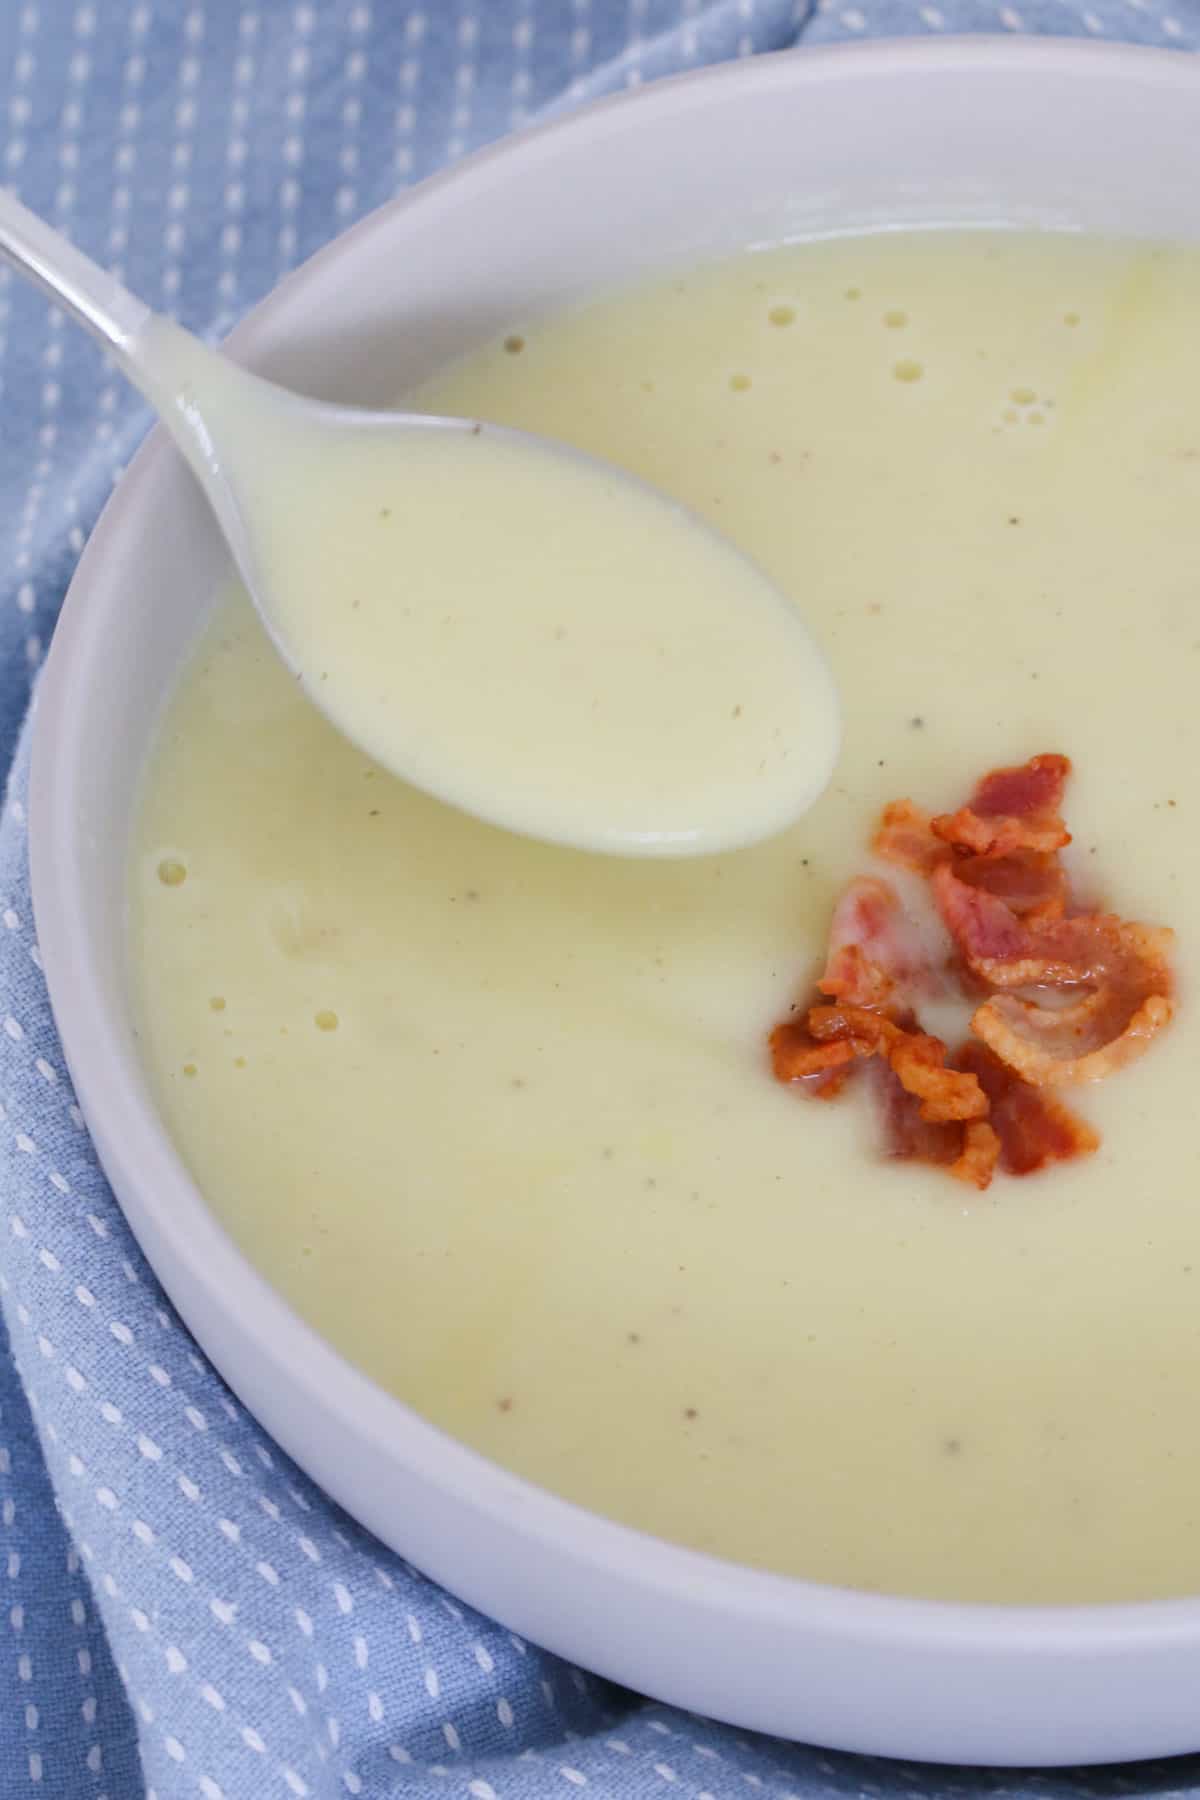 A spoon in a bowl of cauliflower soup with bacon crumbs.